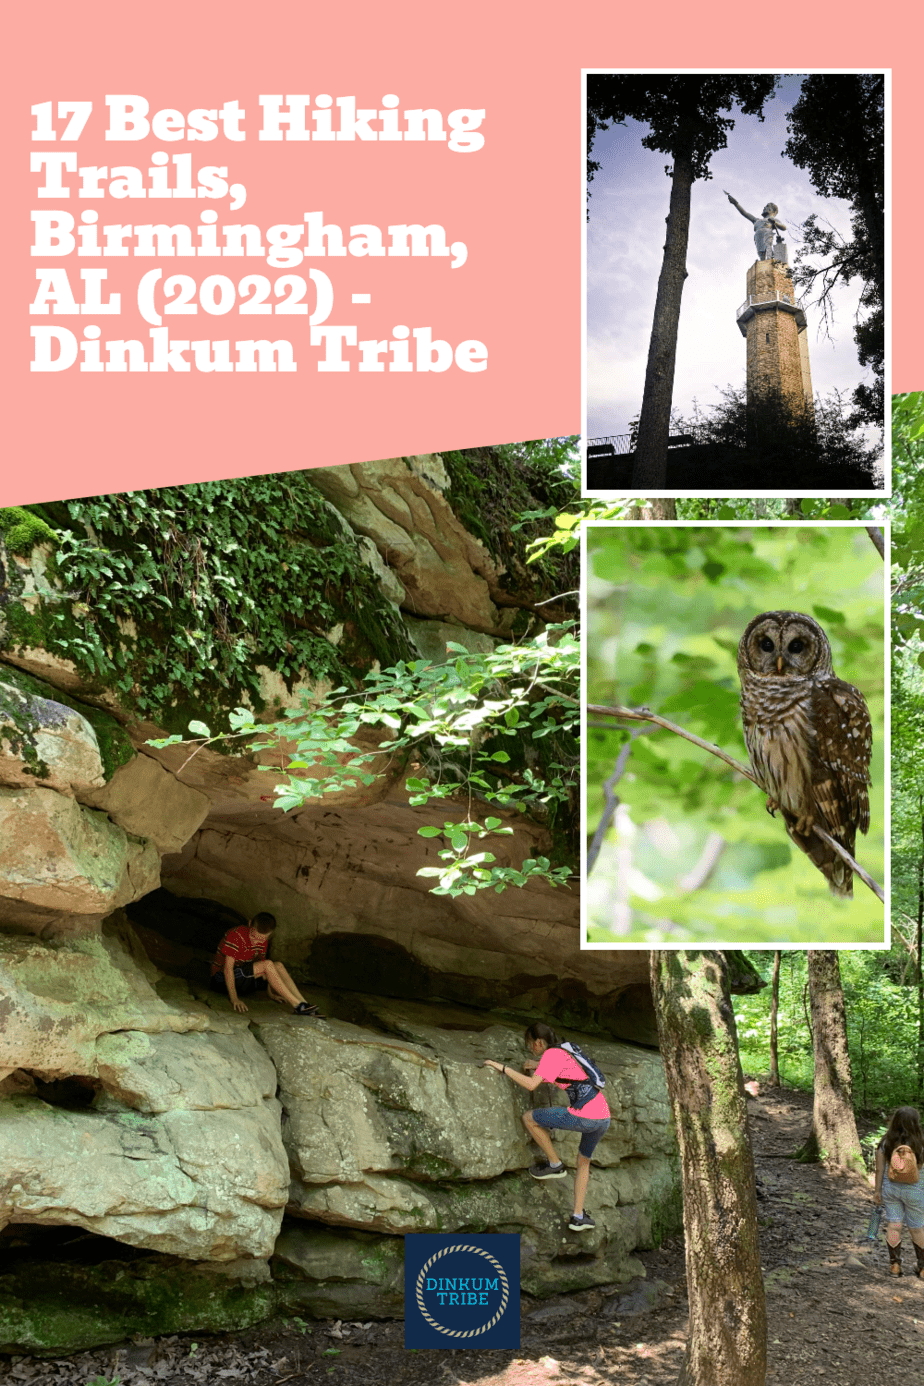 Pinnable collage of images from hiking trails near Birmingham, AL